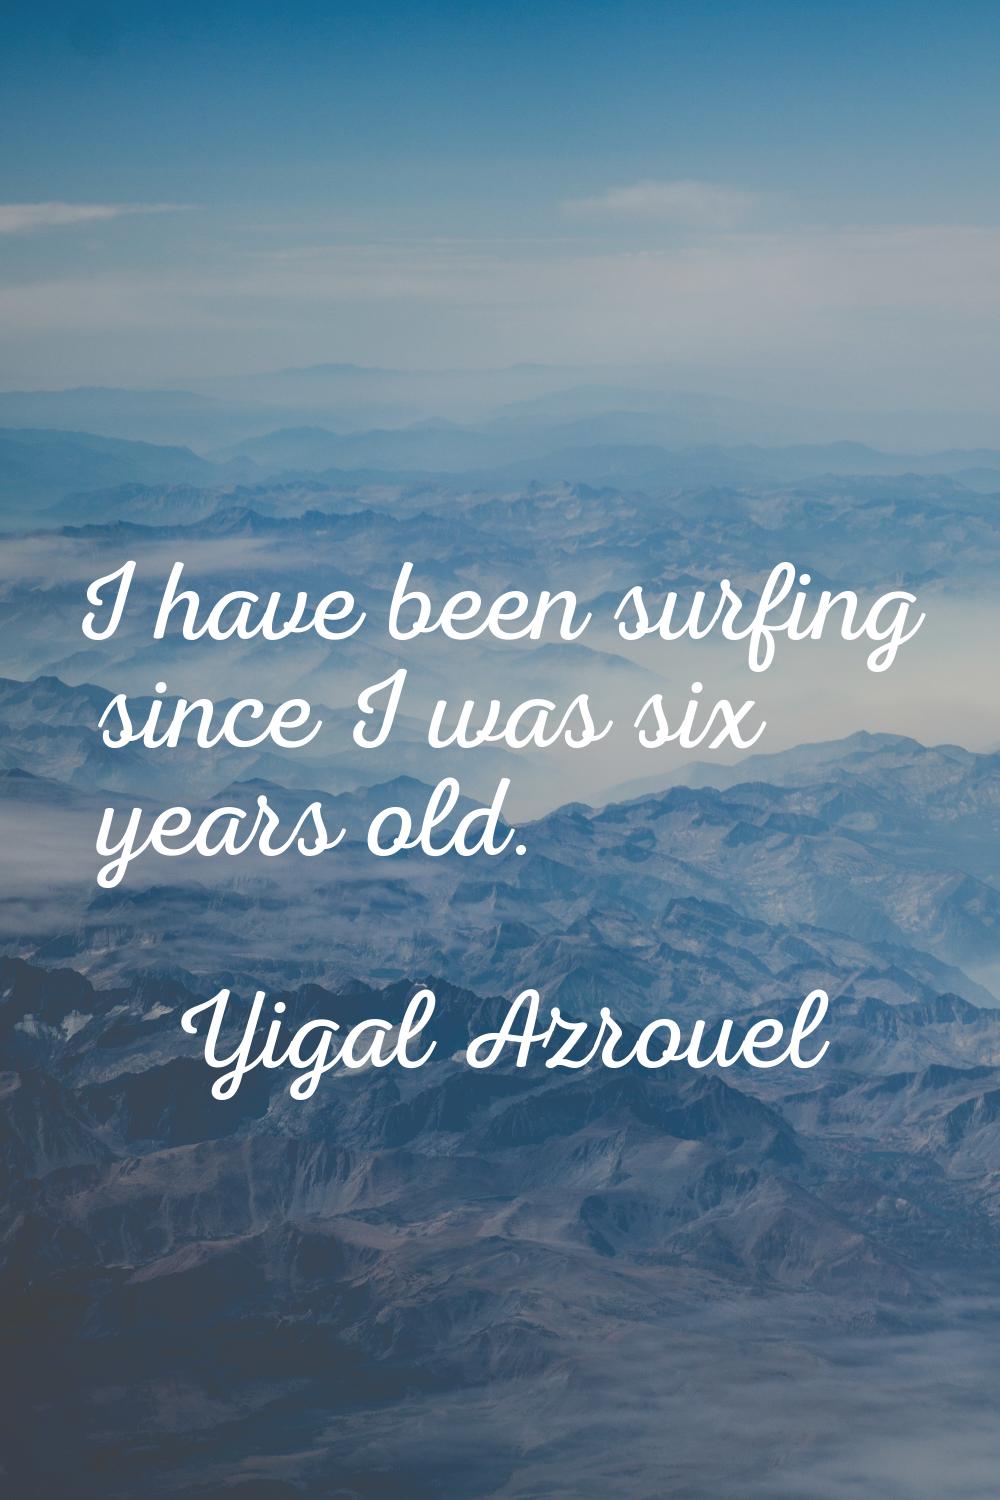 I have been surfing since I was six years old.